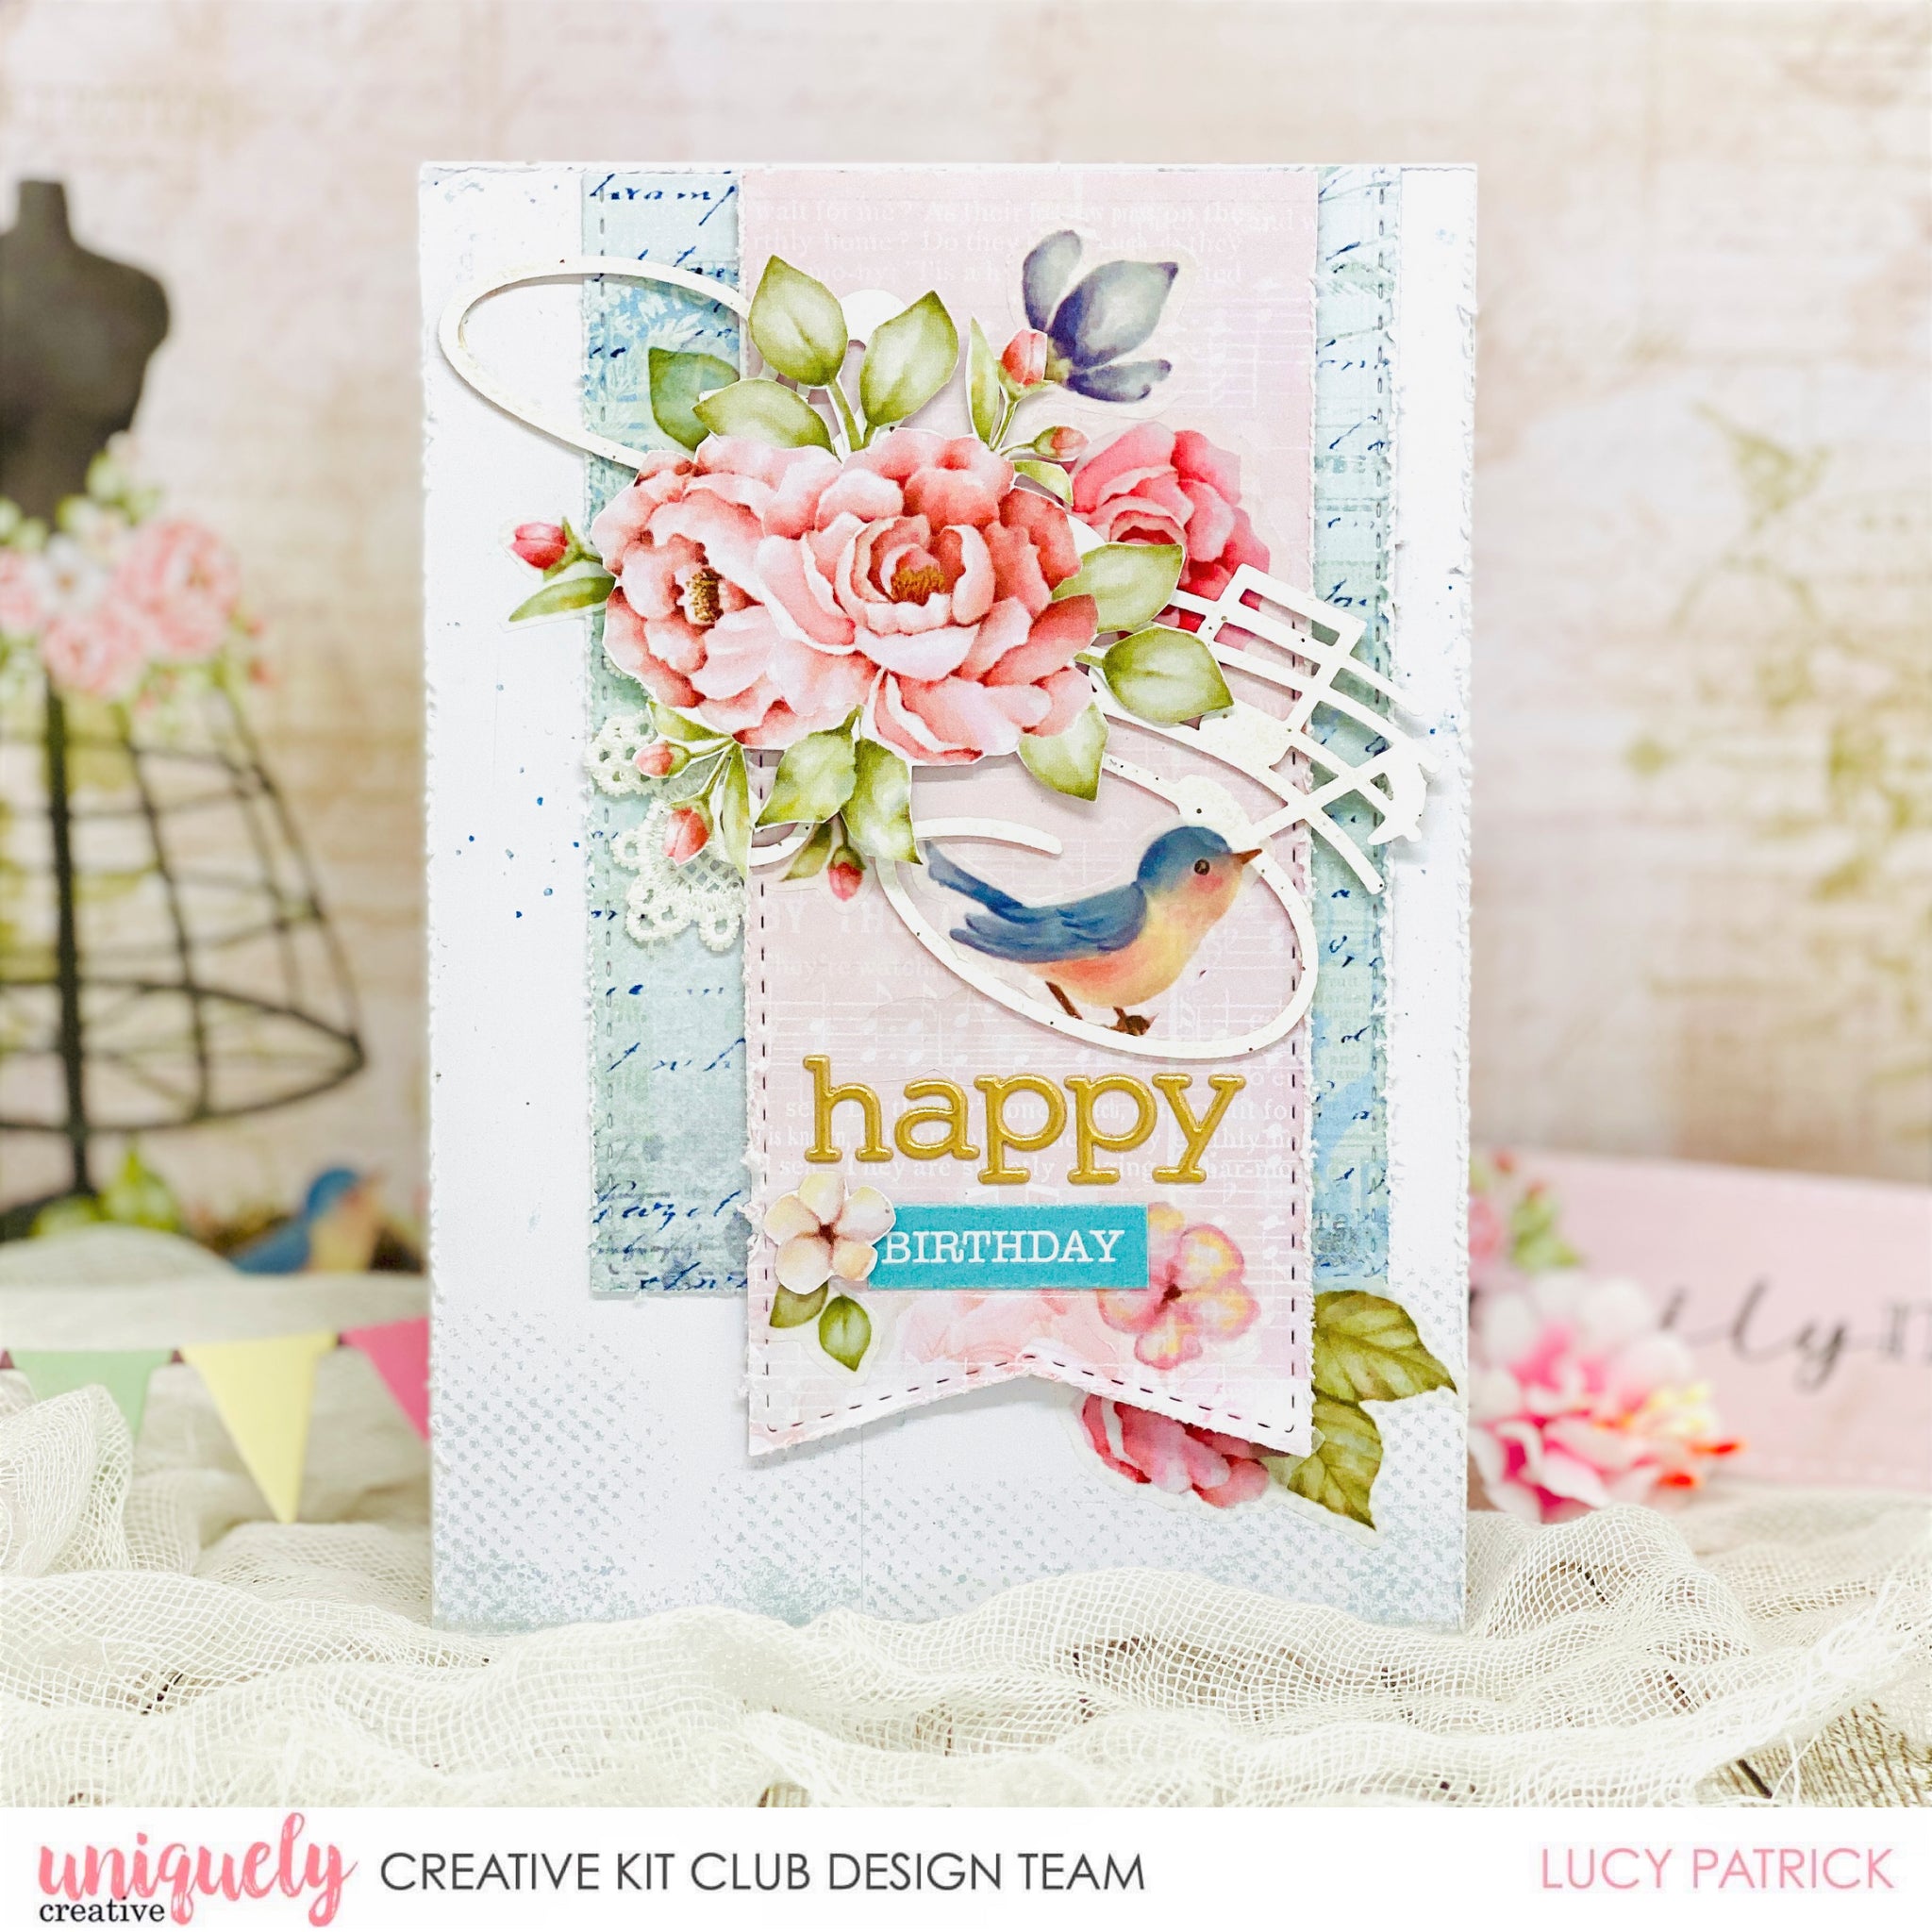 See How to Use these Unique Card Making Supplies